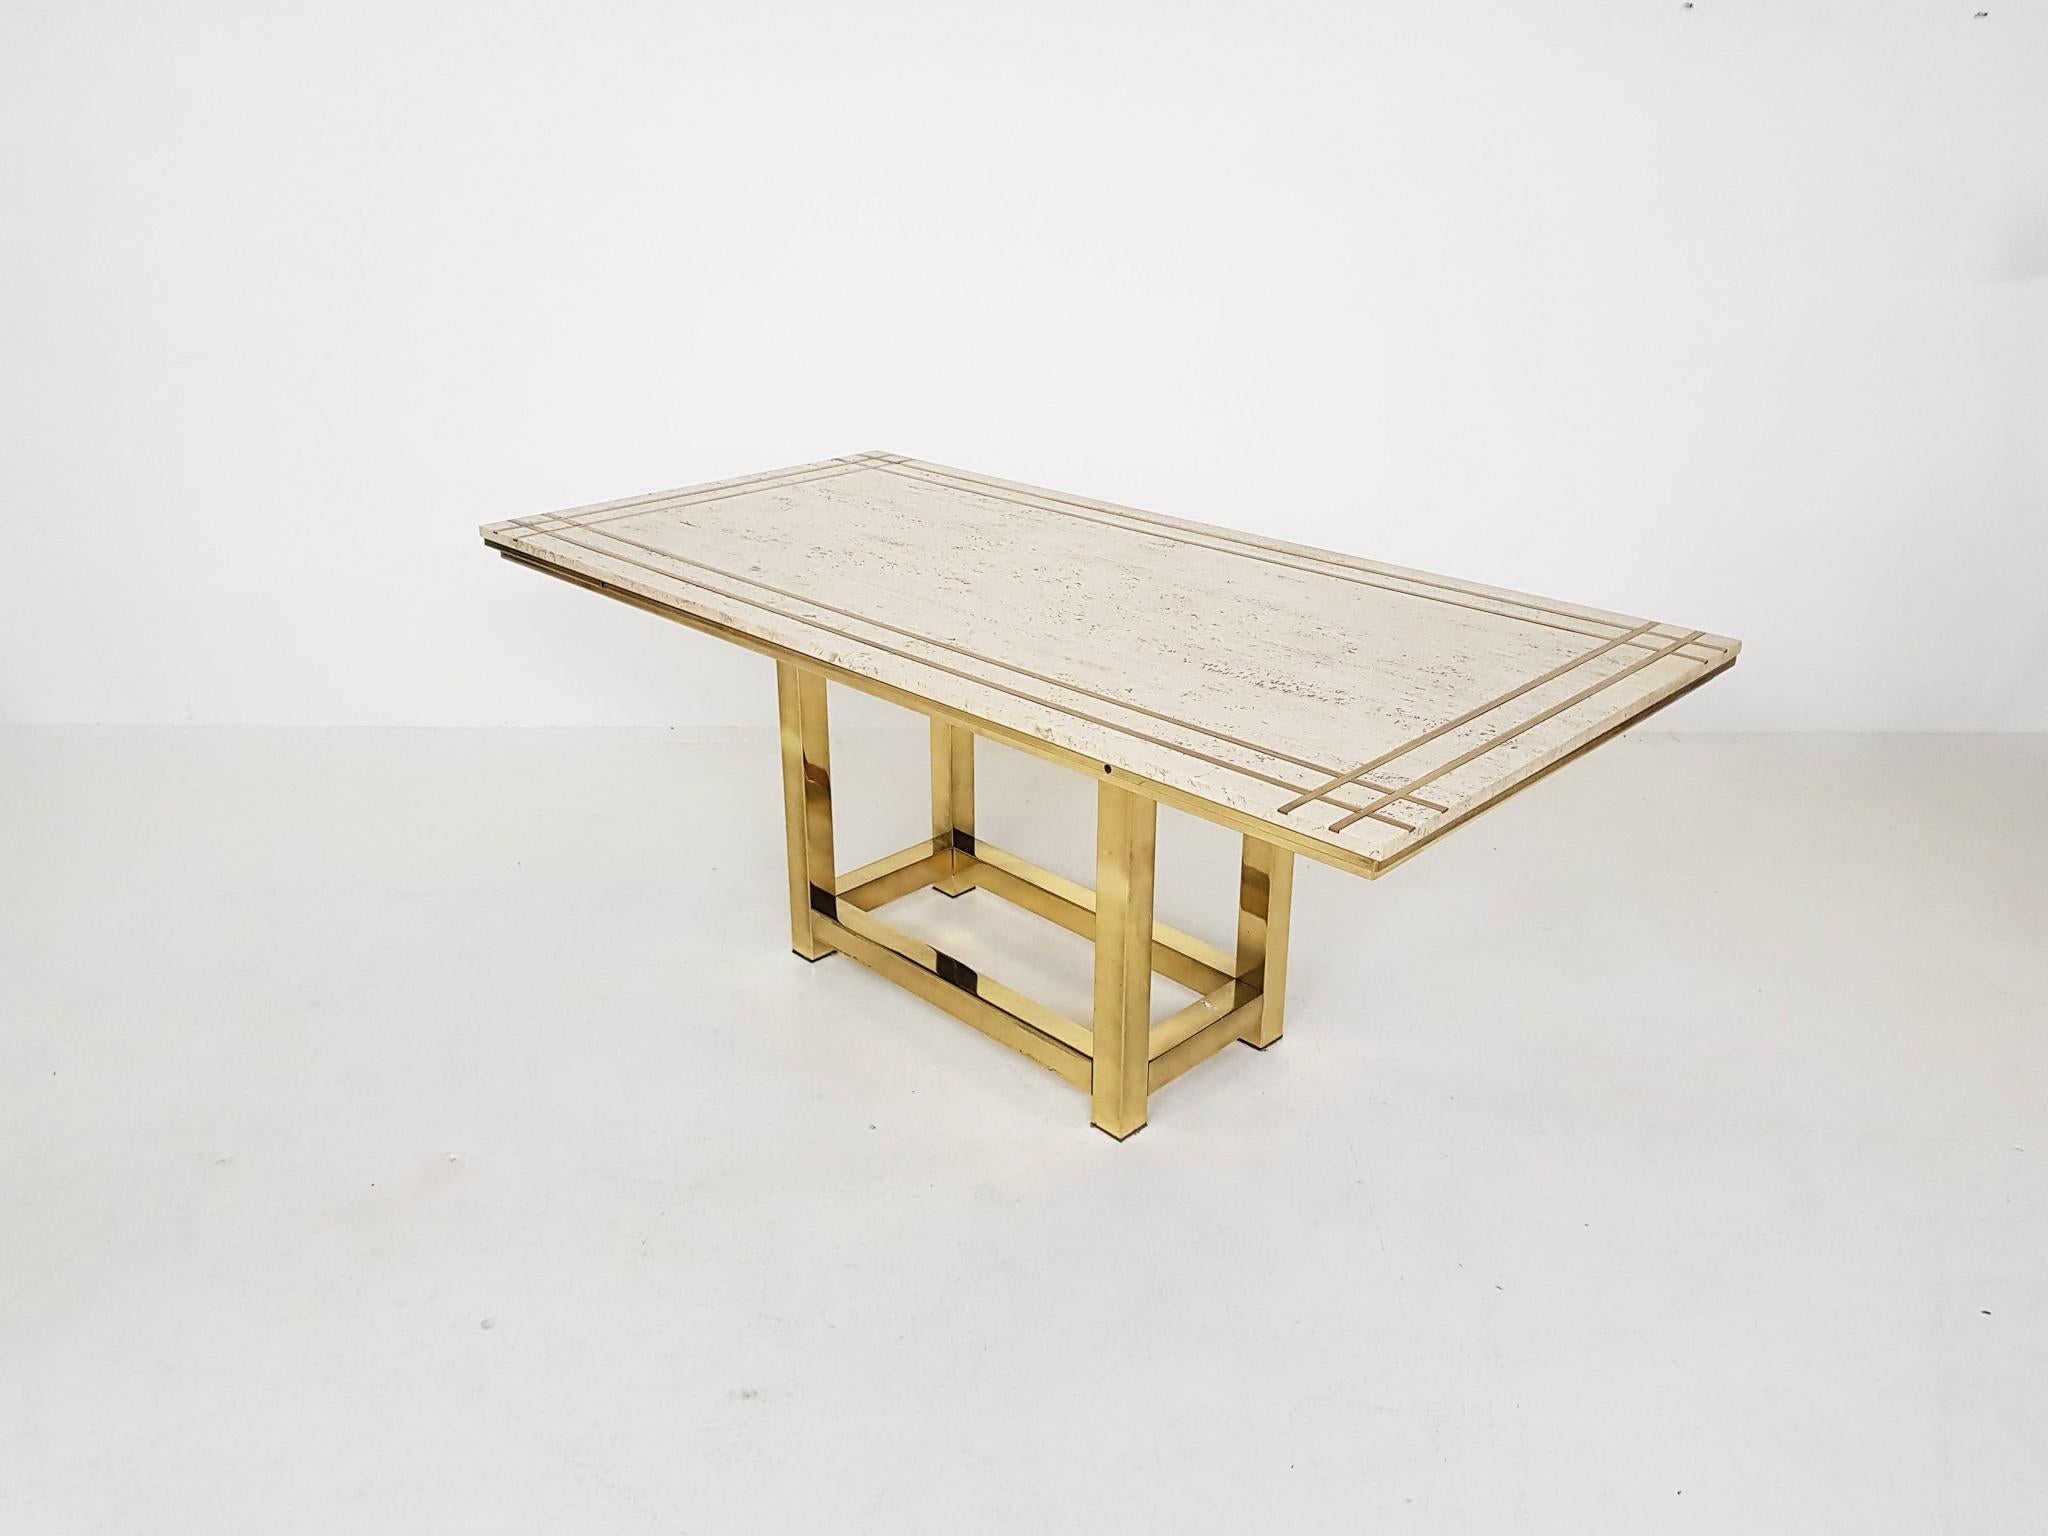 Hollywood Regency Alain Delon Travertine, Brass and Gold Dining Table, France, 1980s For Sale